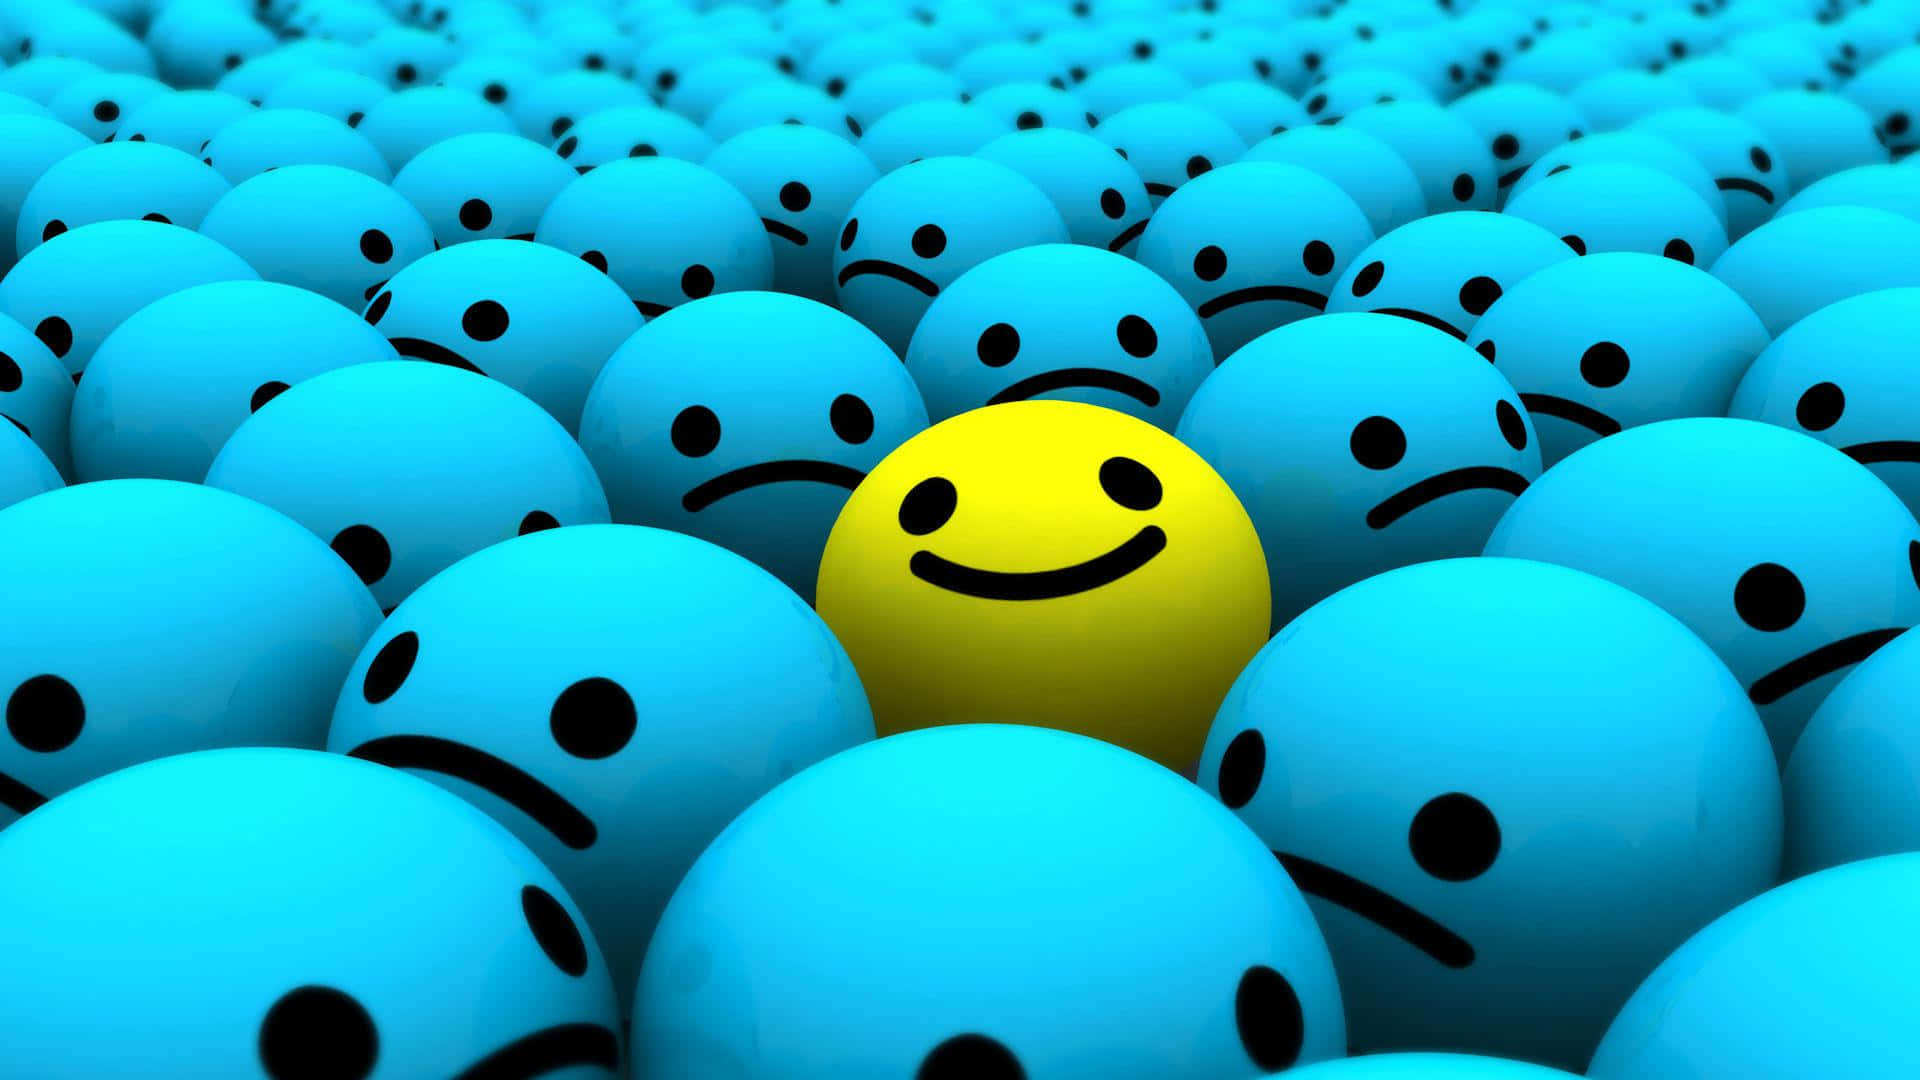 A Yellow Smiley Face In A Crowd Of Blue Eggs Wallpaper